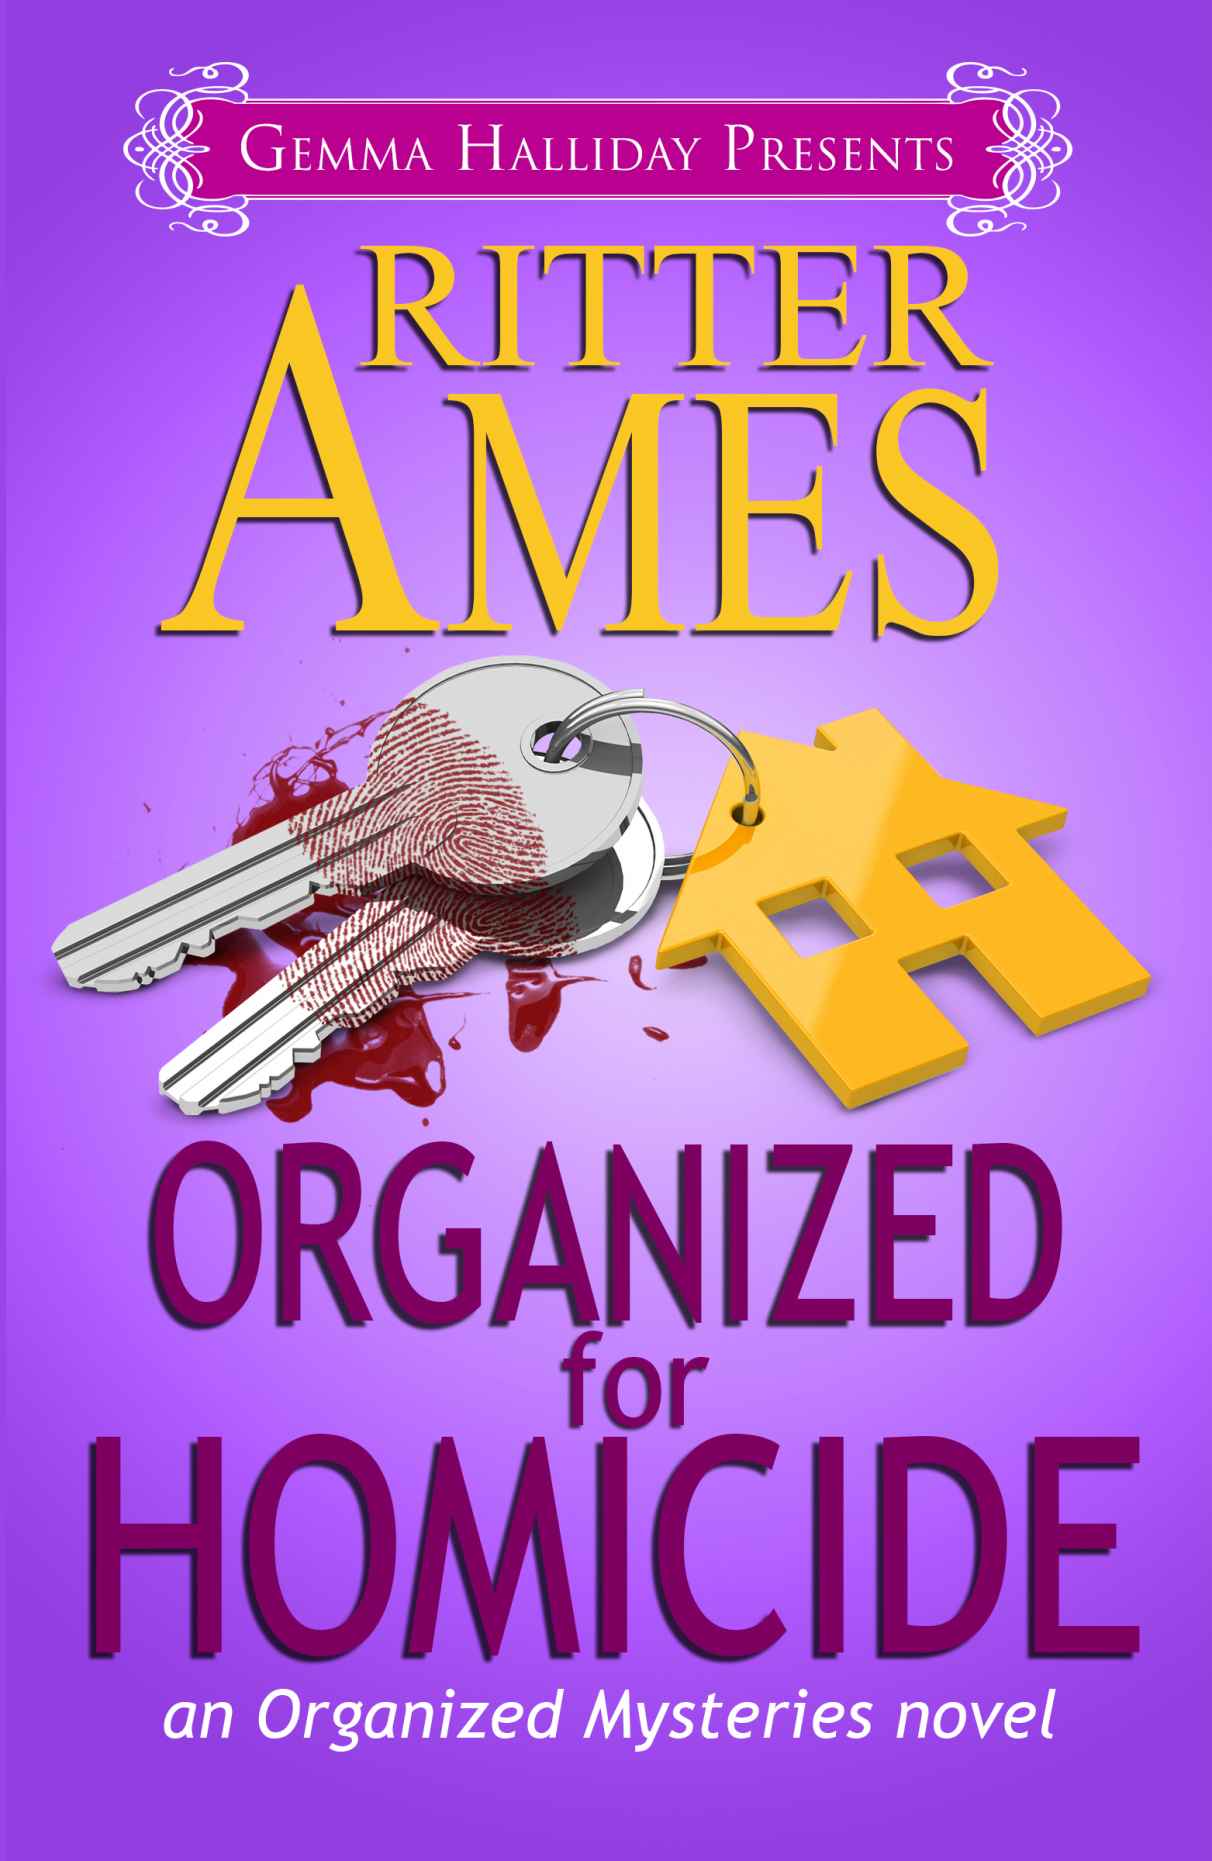 Organized for Homicide (Organized Mysteries Book 2) by Ritter Ames